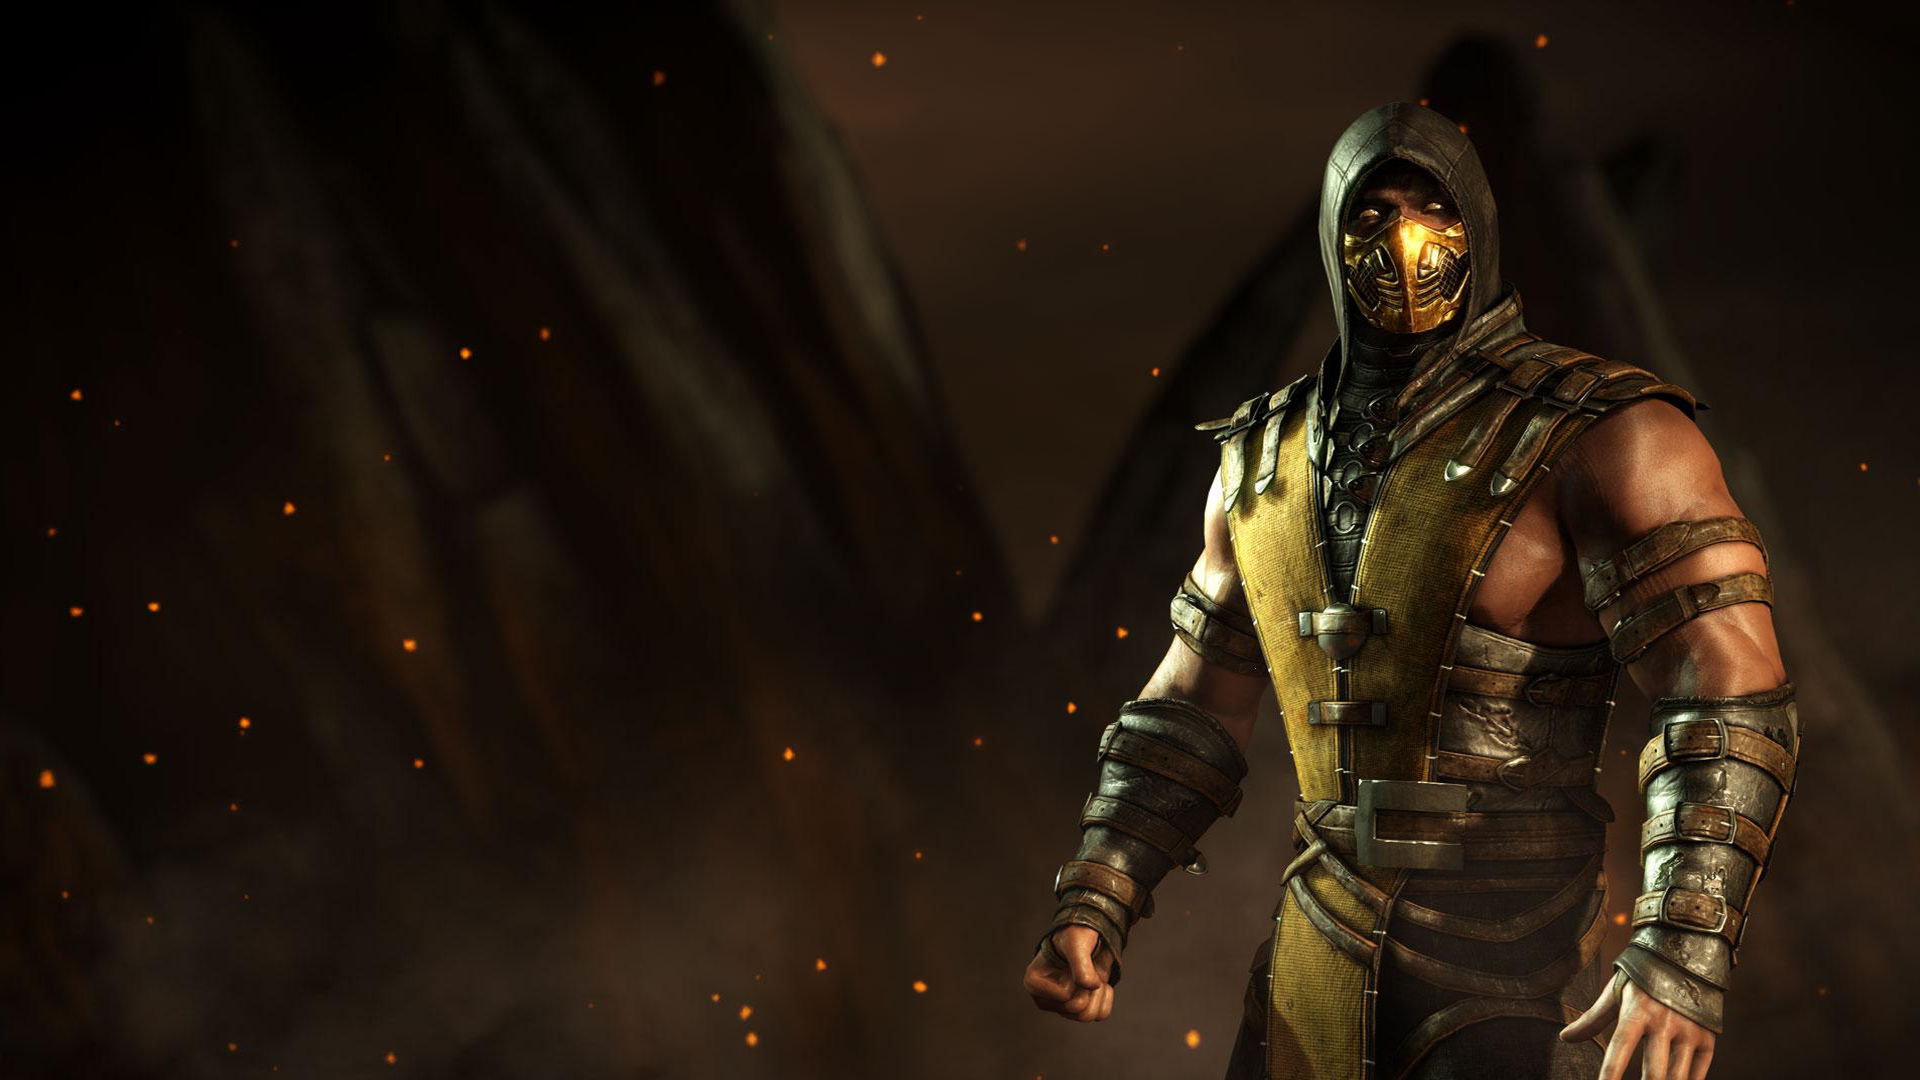 Mortal Kombat 11 available now on Stadia